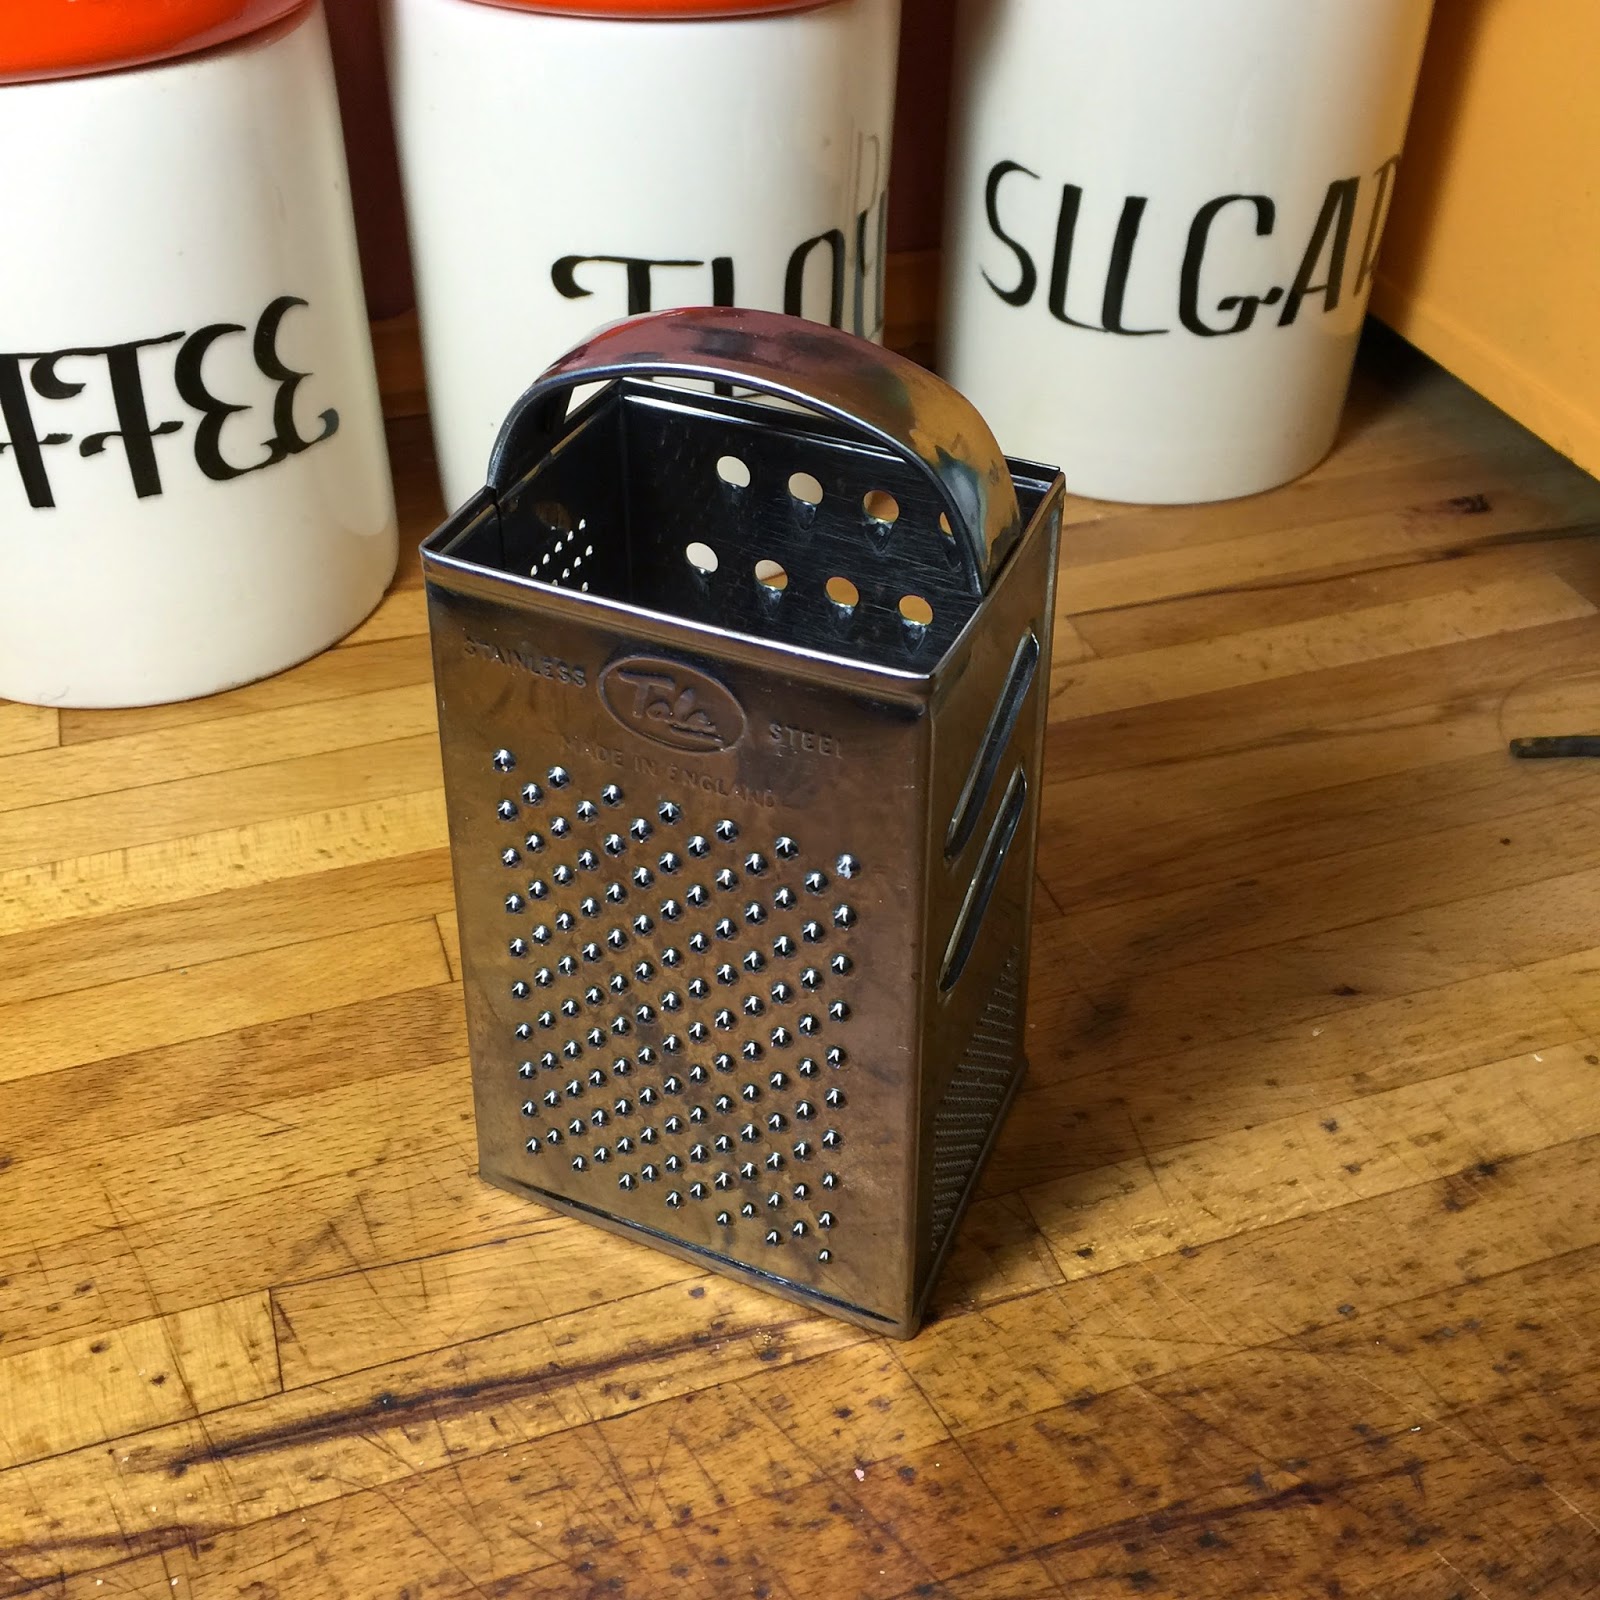 1940-50s Mouli Rotary Grater - Ruby Lane